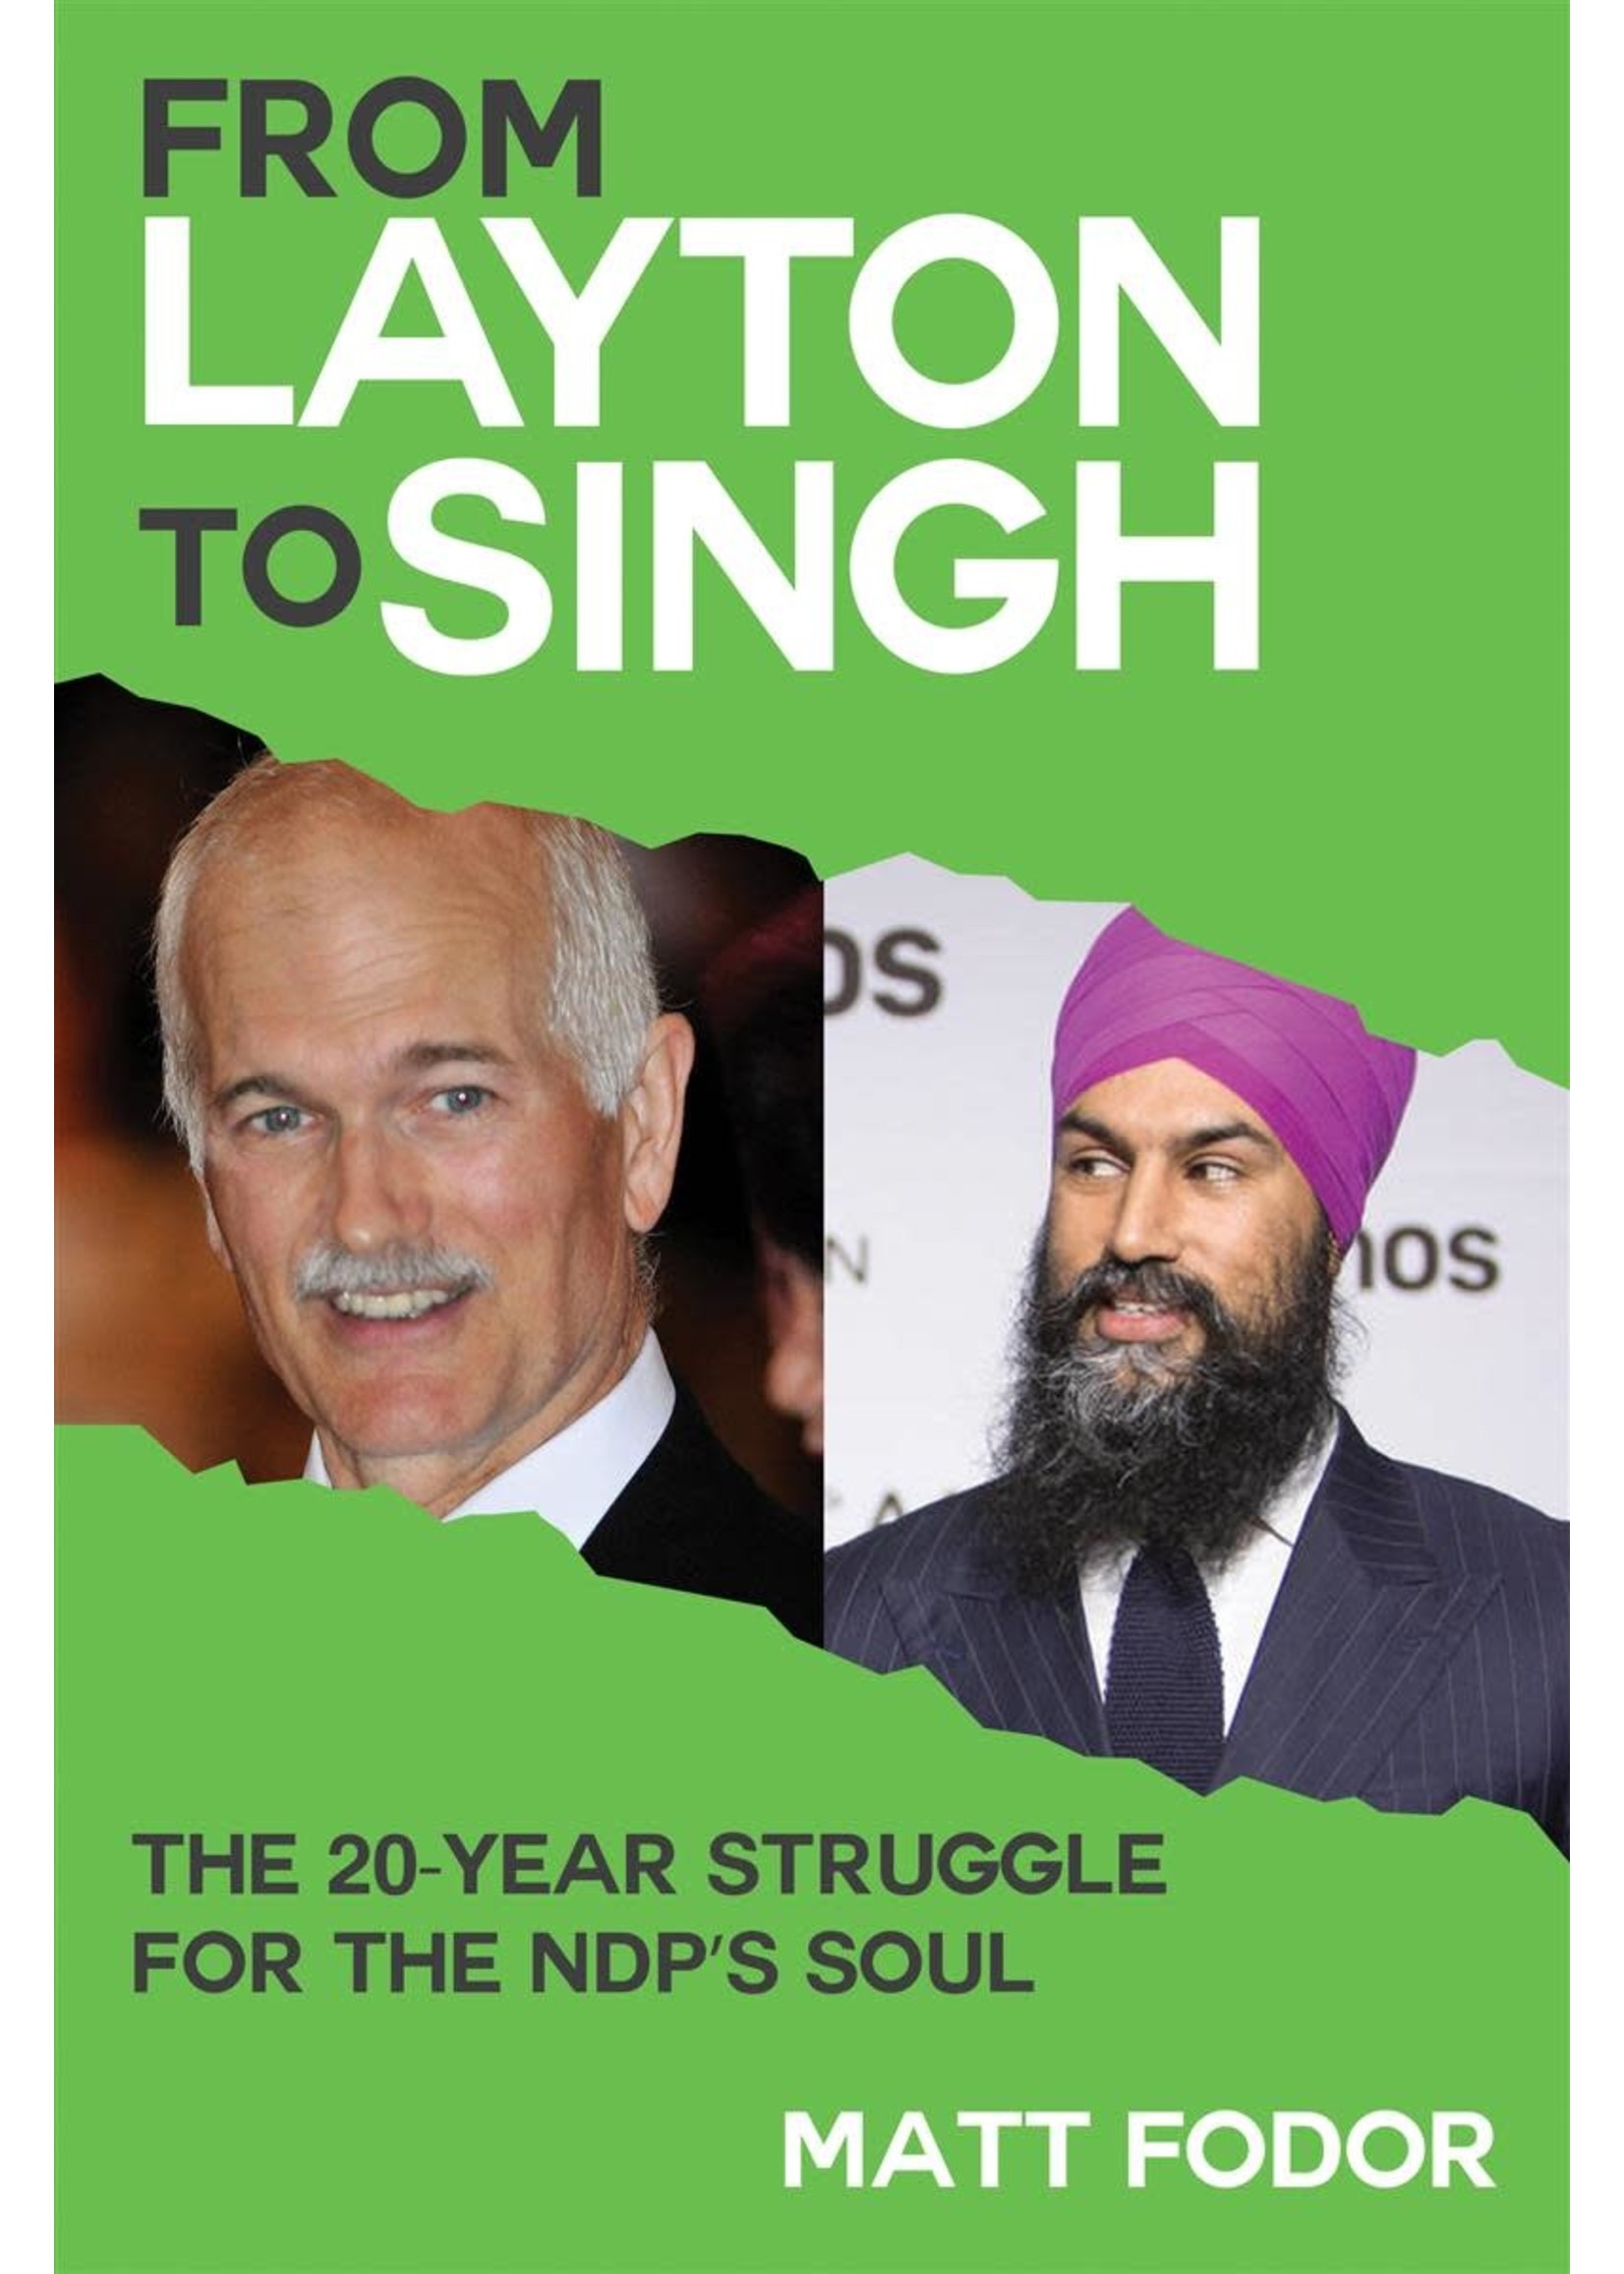 From Layton to Singh: The 20-year conflict behind the NDP's deal with the Trudeau Liberals by Matt Fodor